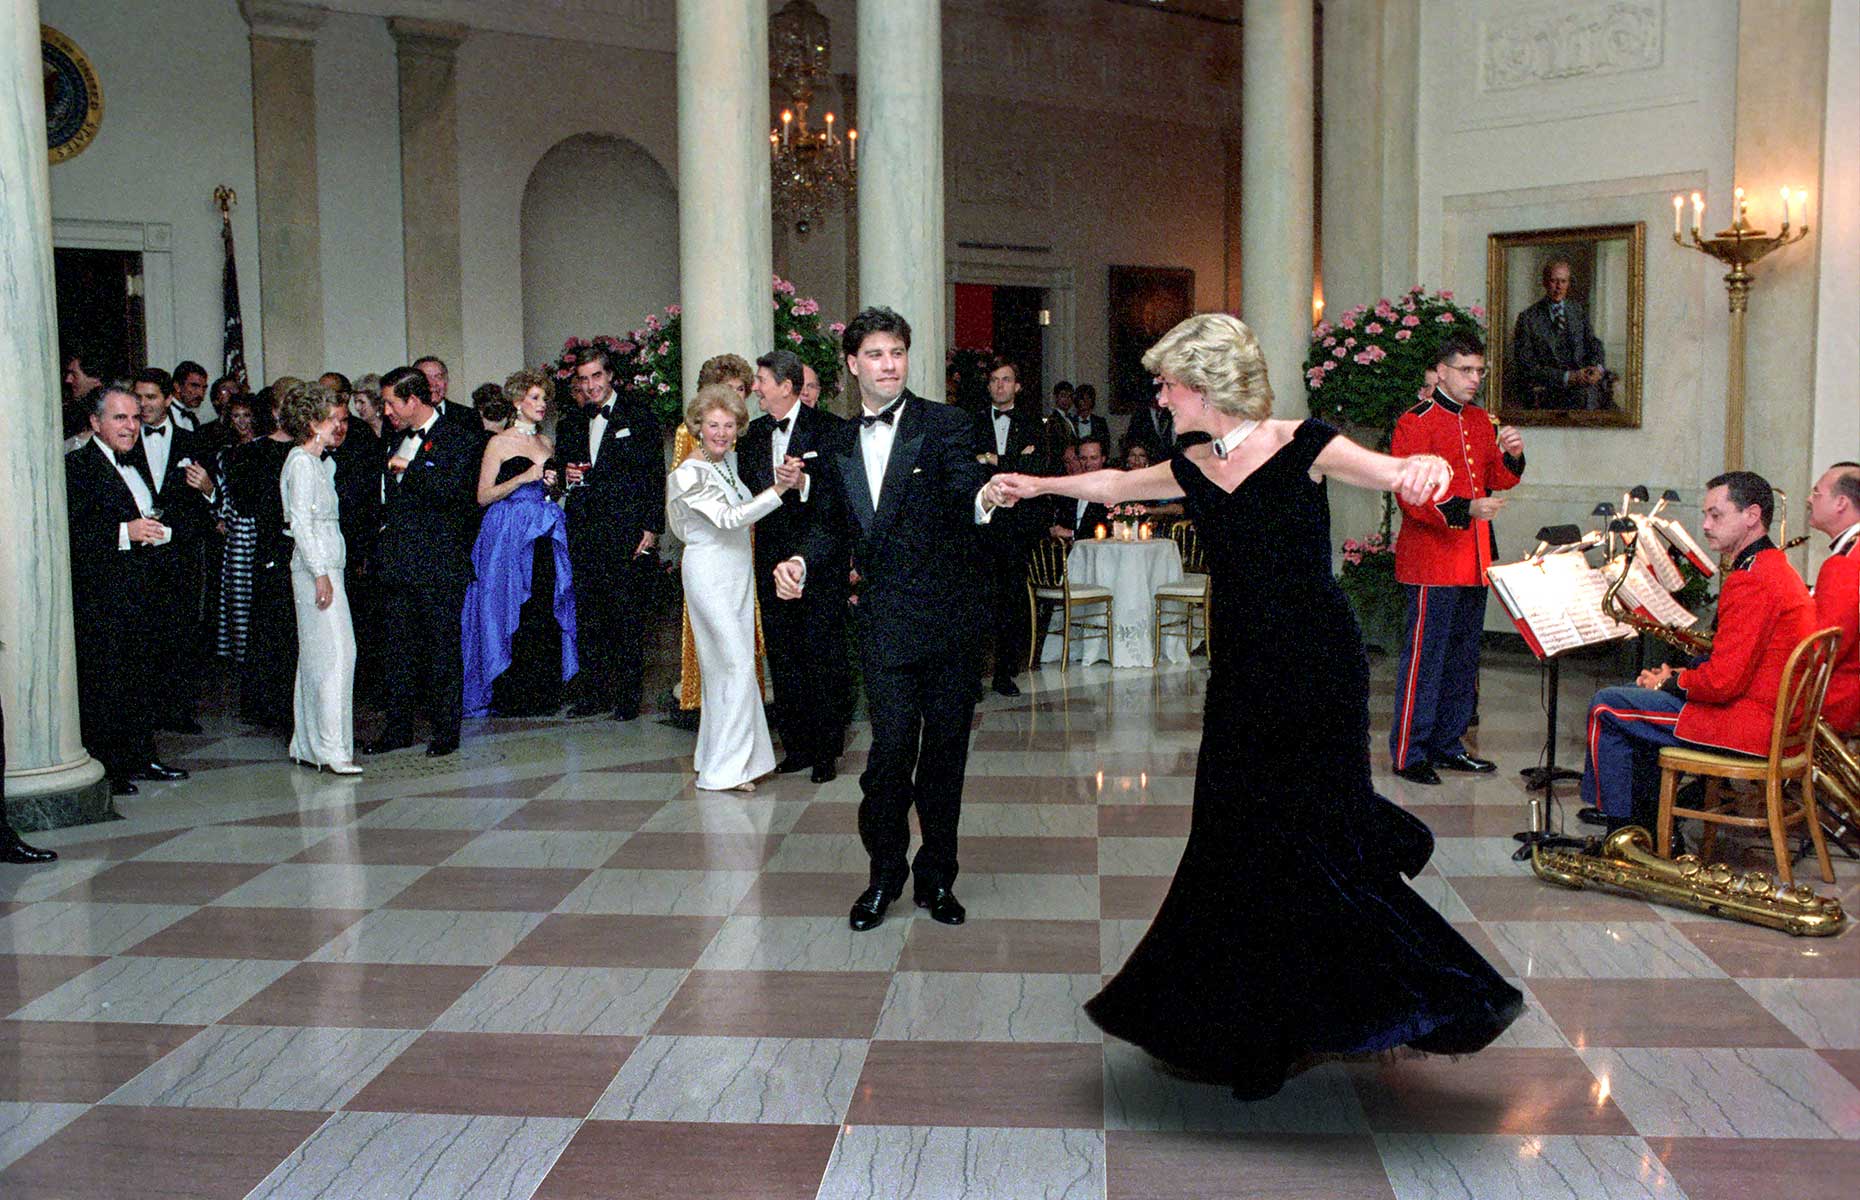 John Travolta and Princess Diana dancing at the White House in 1985. (Image: Pete Souza/The White House via Getty Images)